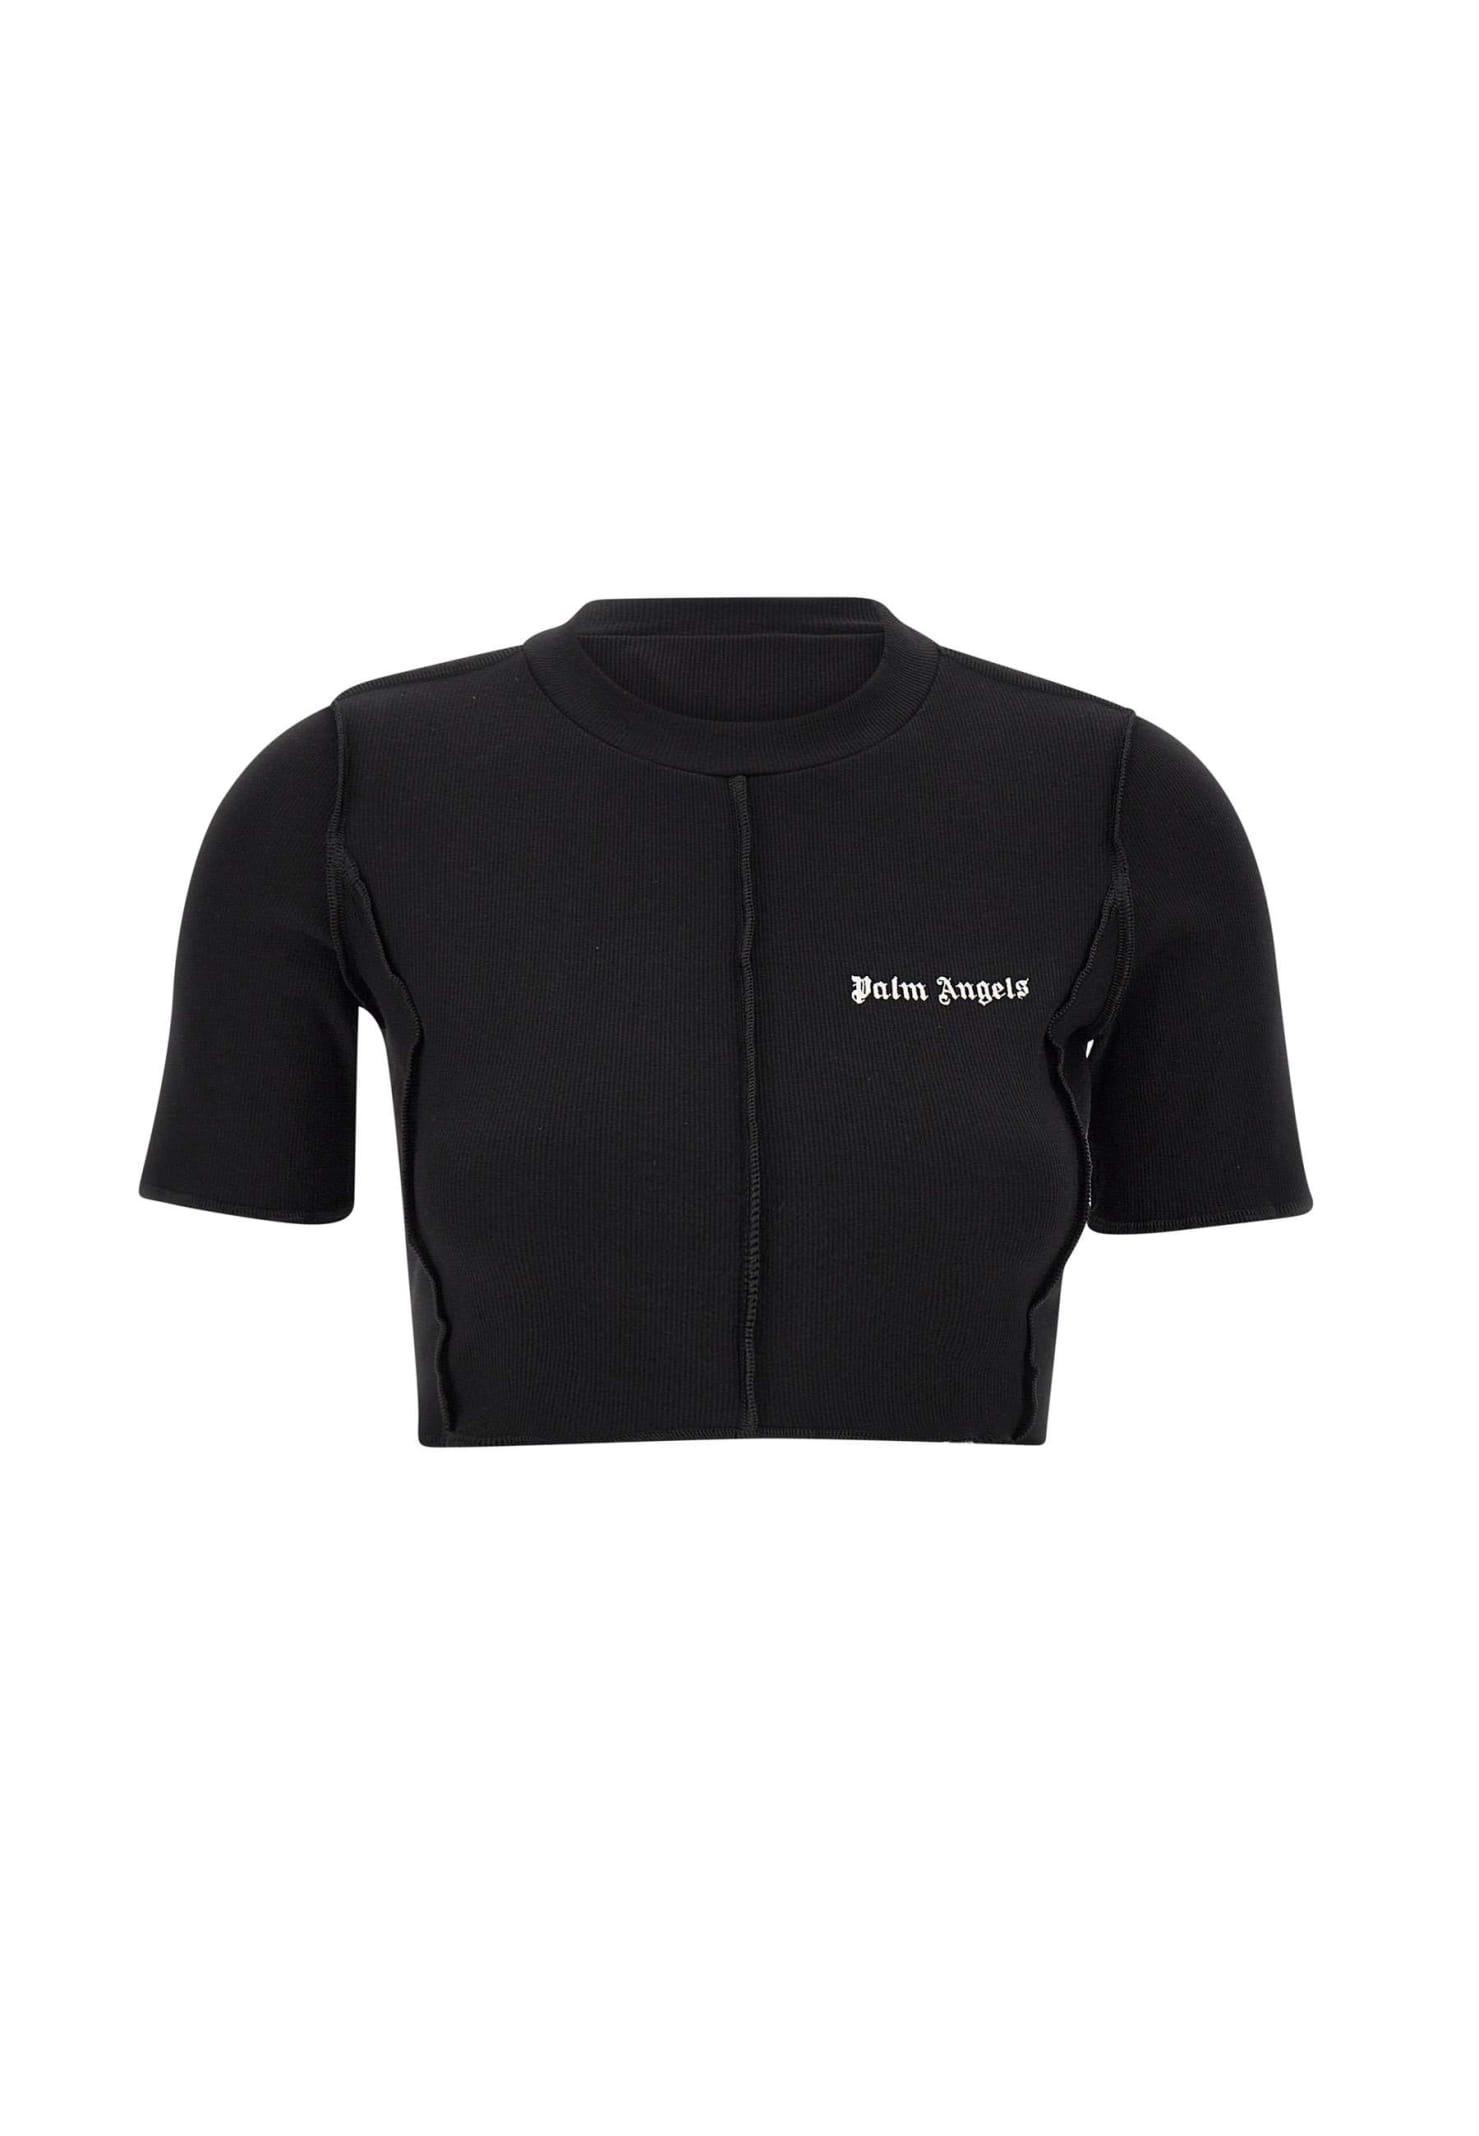 Palm Angels Cotton "classic Logo Crop Top" in Black | Lyst